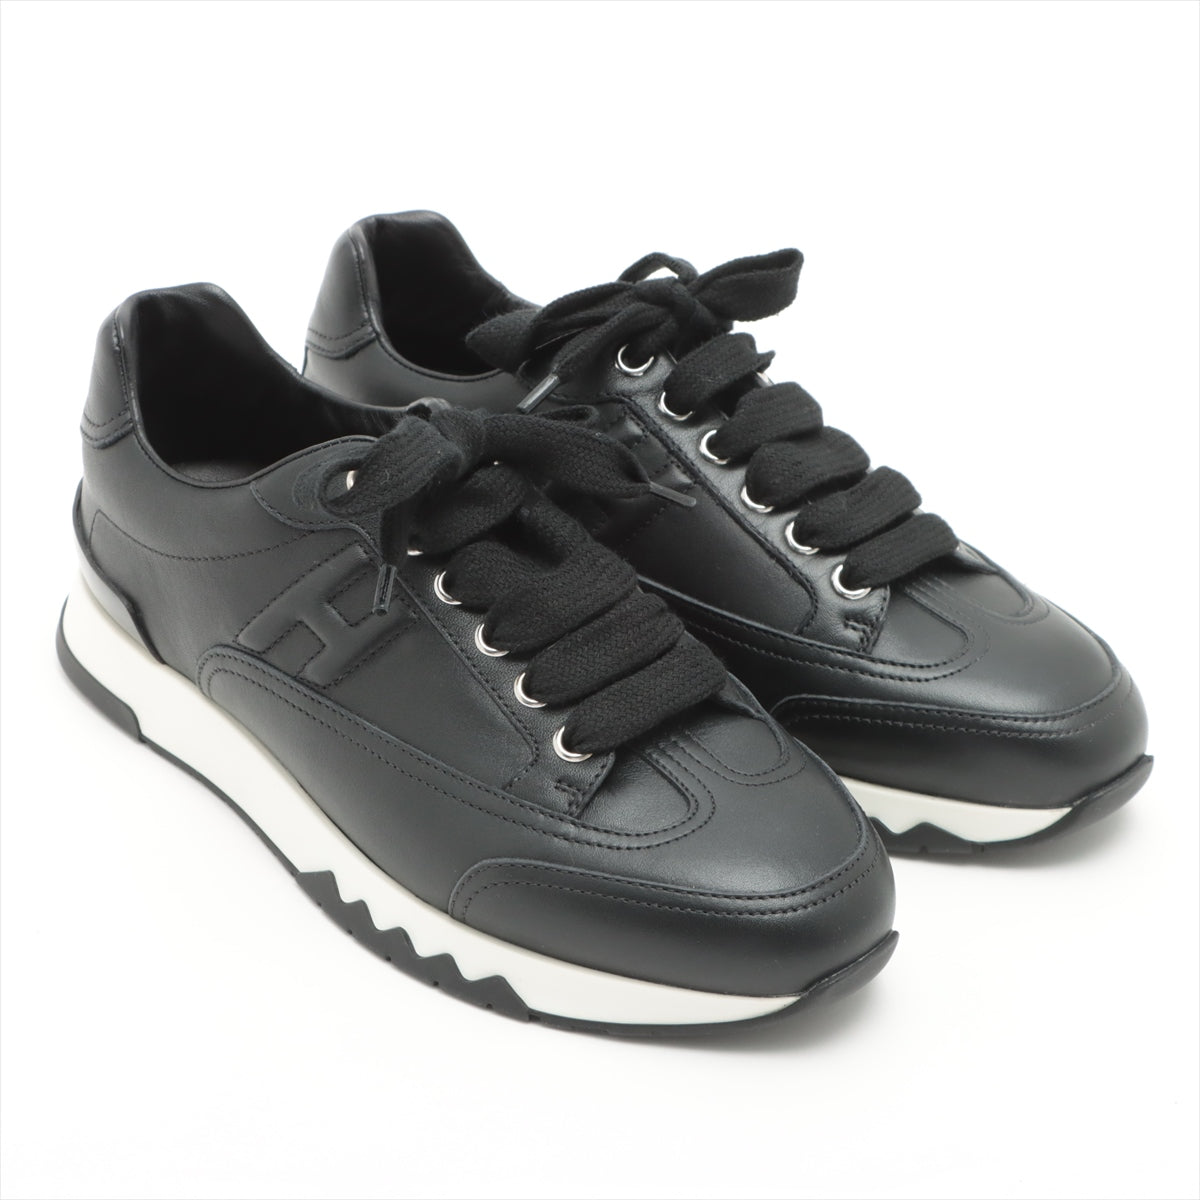 Hermès trails Leather Sneakers 35 1/2 Ladies' Black × White Is there a replacement string